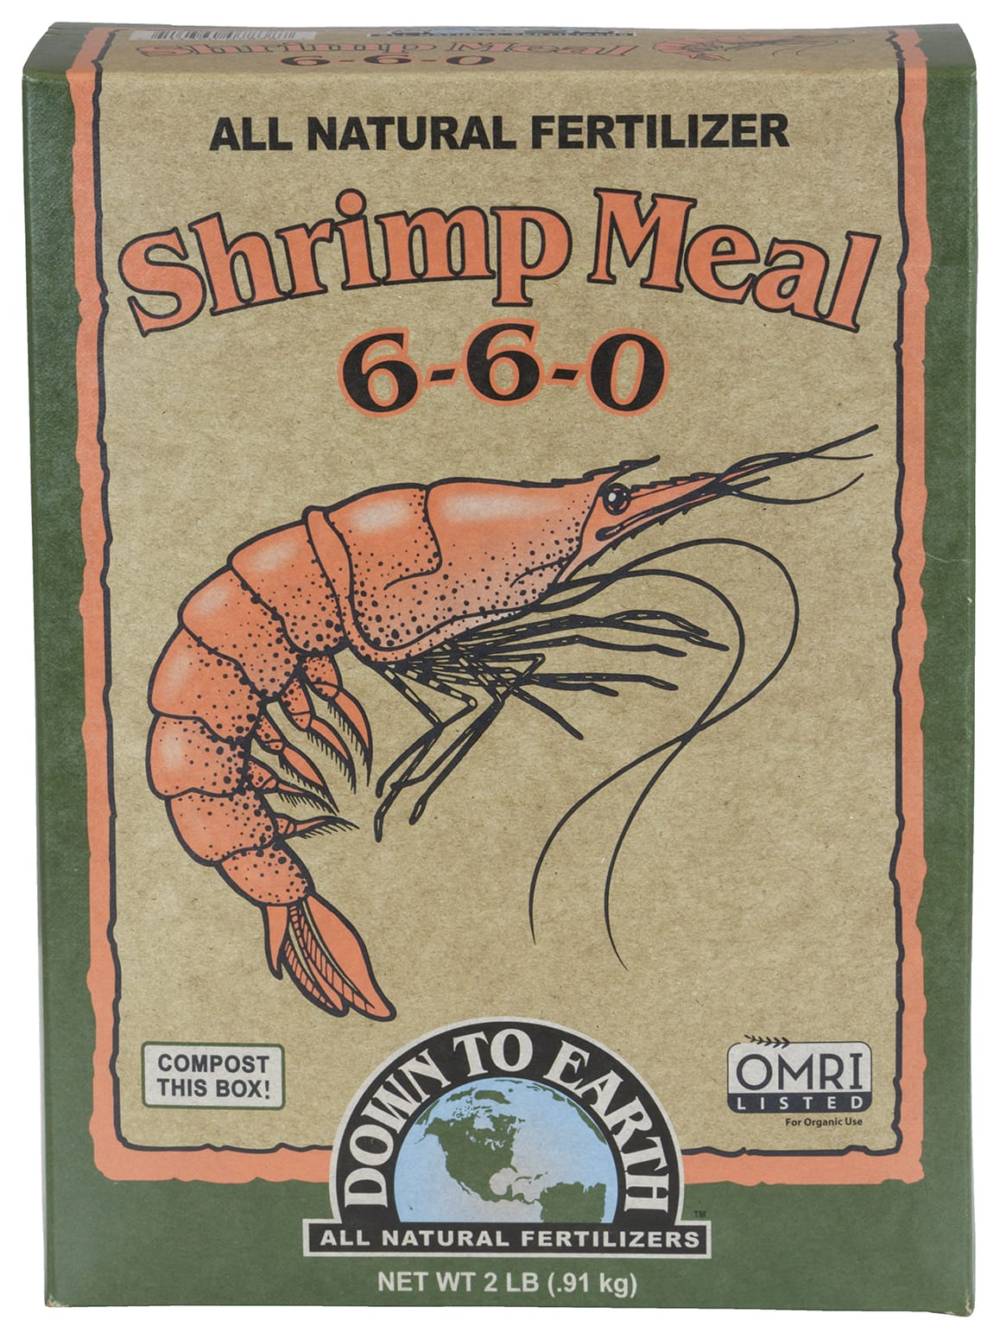 Box of Down To Earth Shrimp Meal